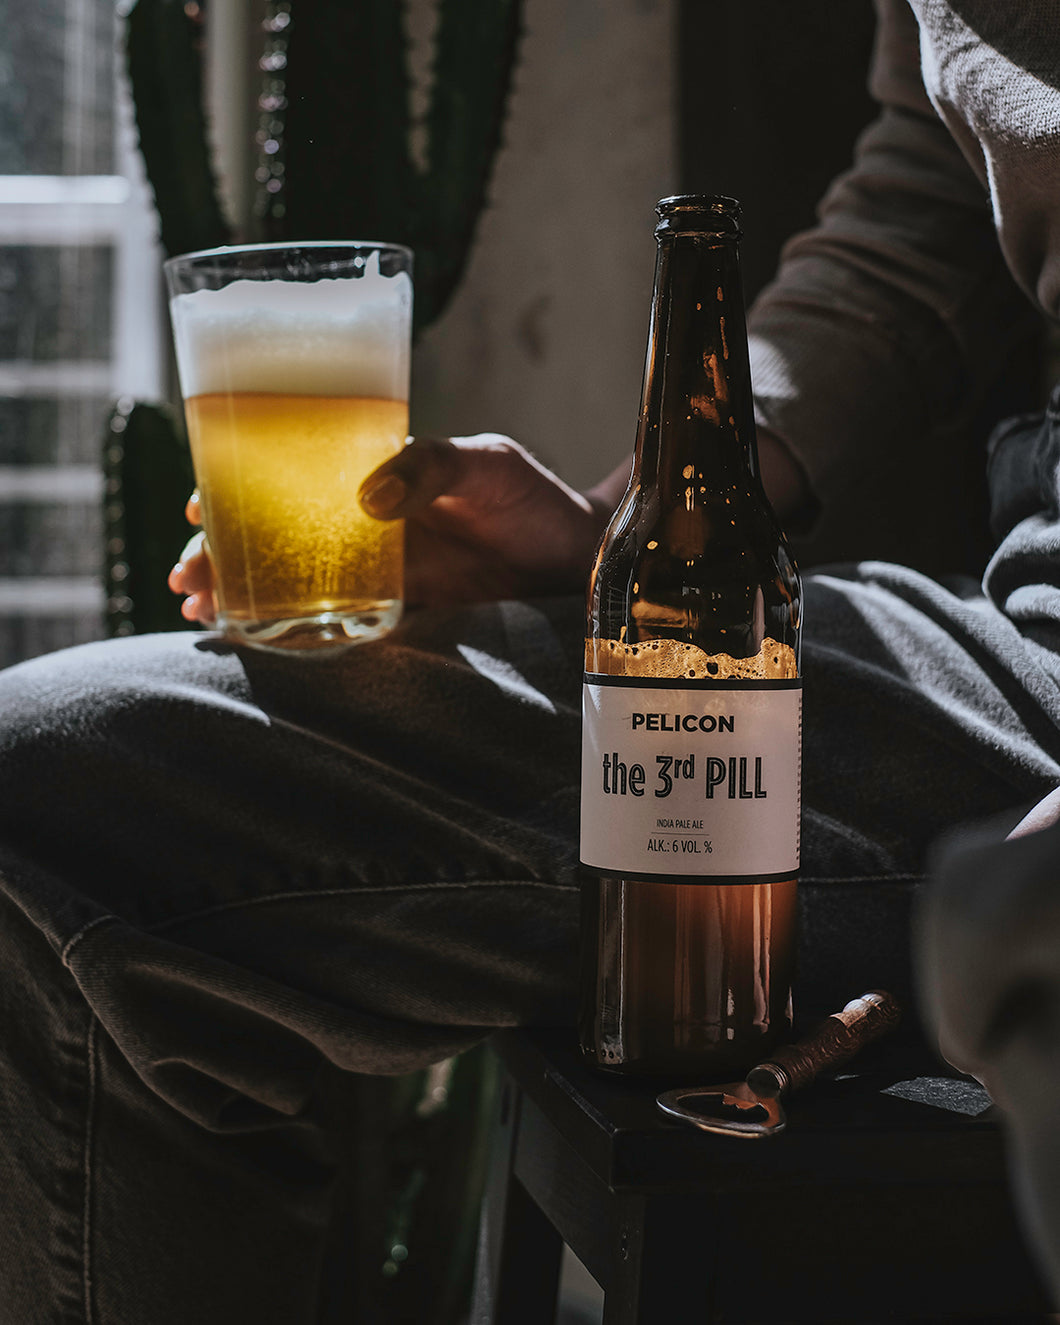 The 3rd Pill (IPA)